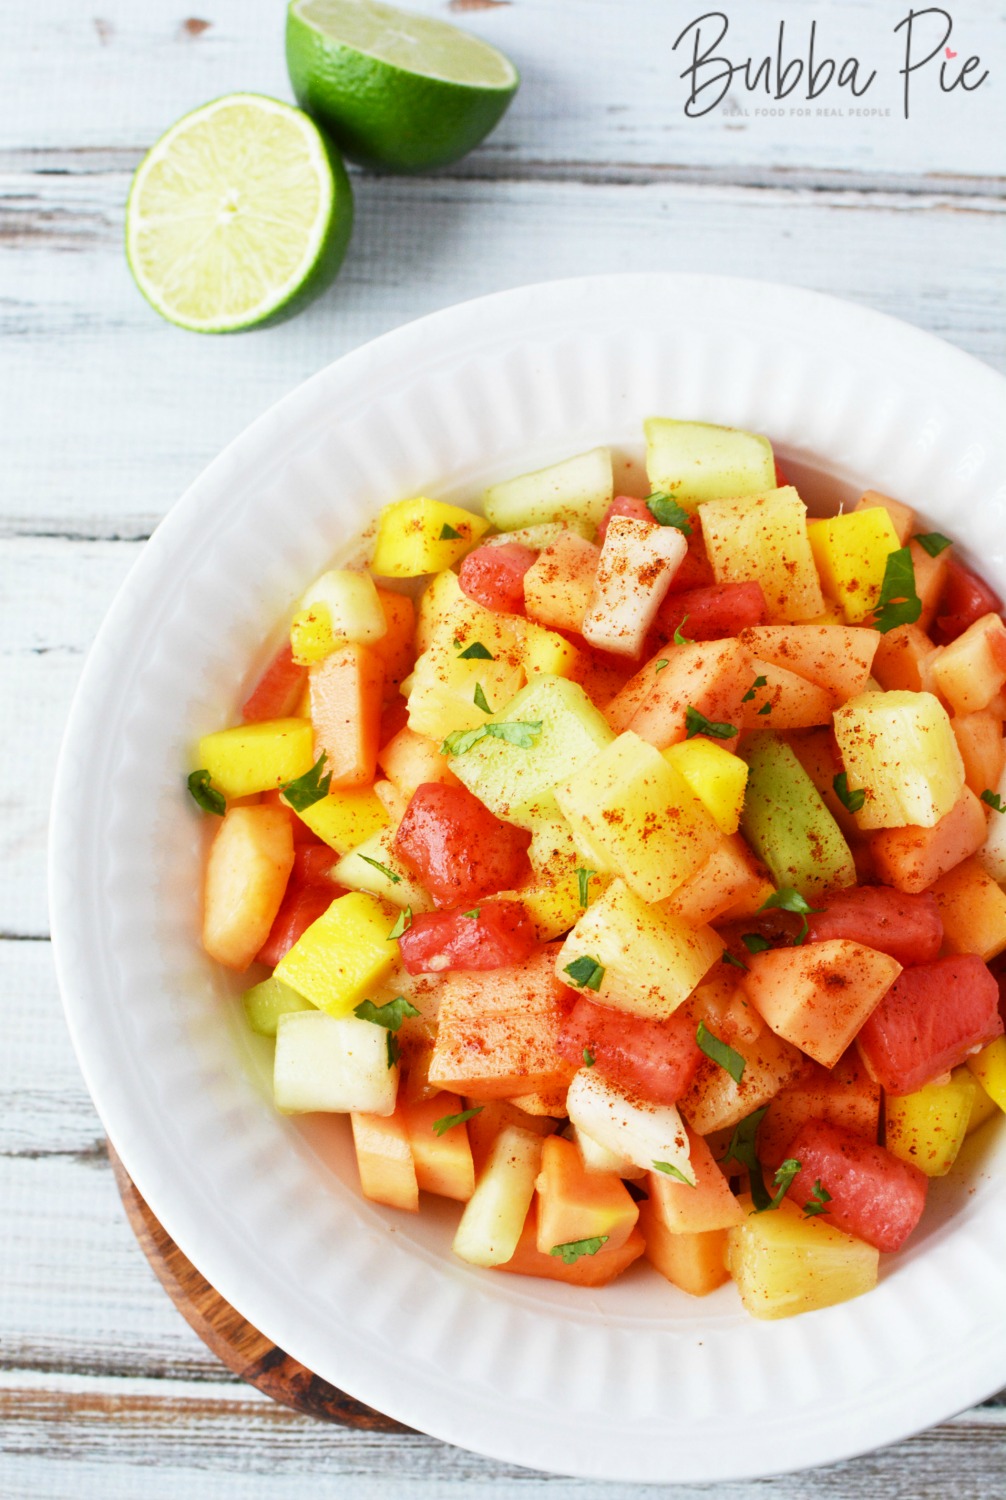 Mexican Fruit Salad With Chili Powder